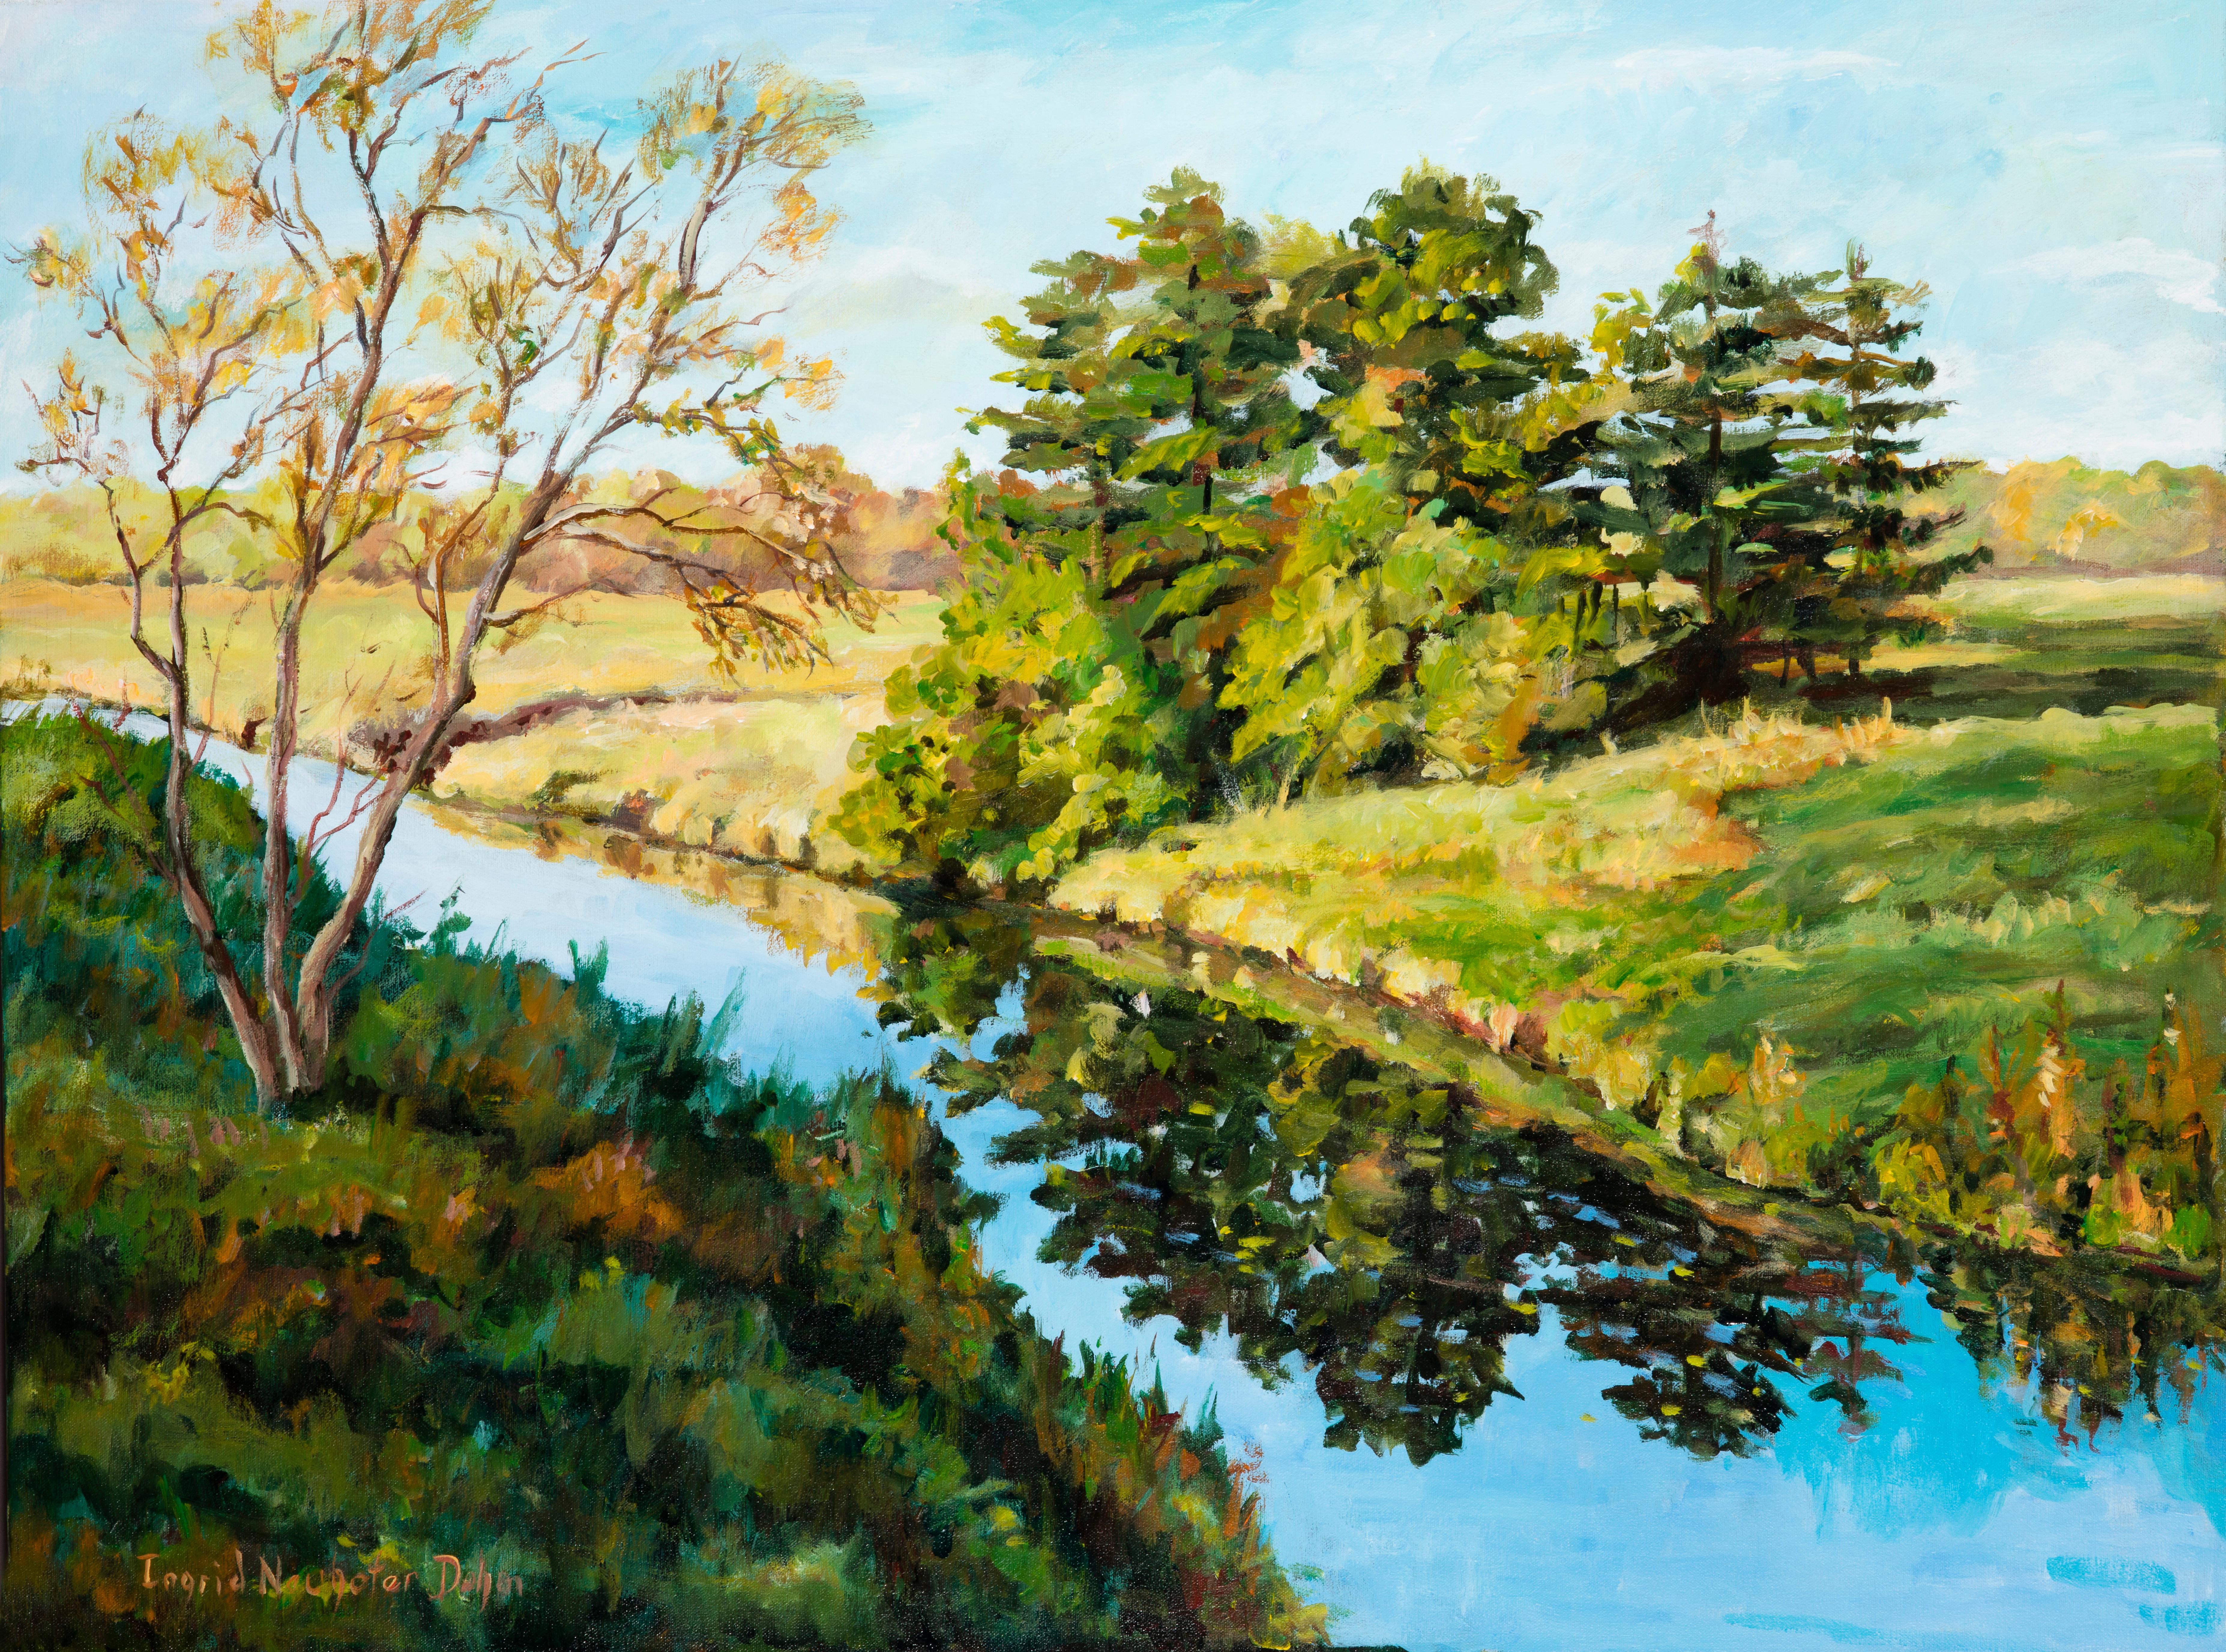 Country Stream, Original Contemporary Impressionist Landscape Painting, 2016
30" x 40" x 1.5" (HxWxD) Acrylic on Canvas
Hand-signed by the artist.

A lush green landscape surrounds a bright blue stream that nearly glows beneath the sunlight beaming